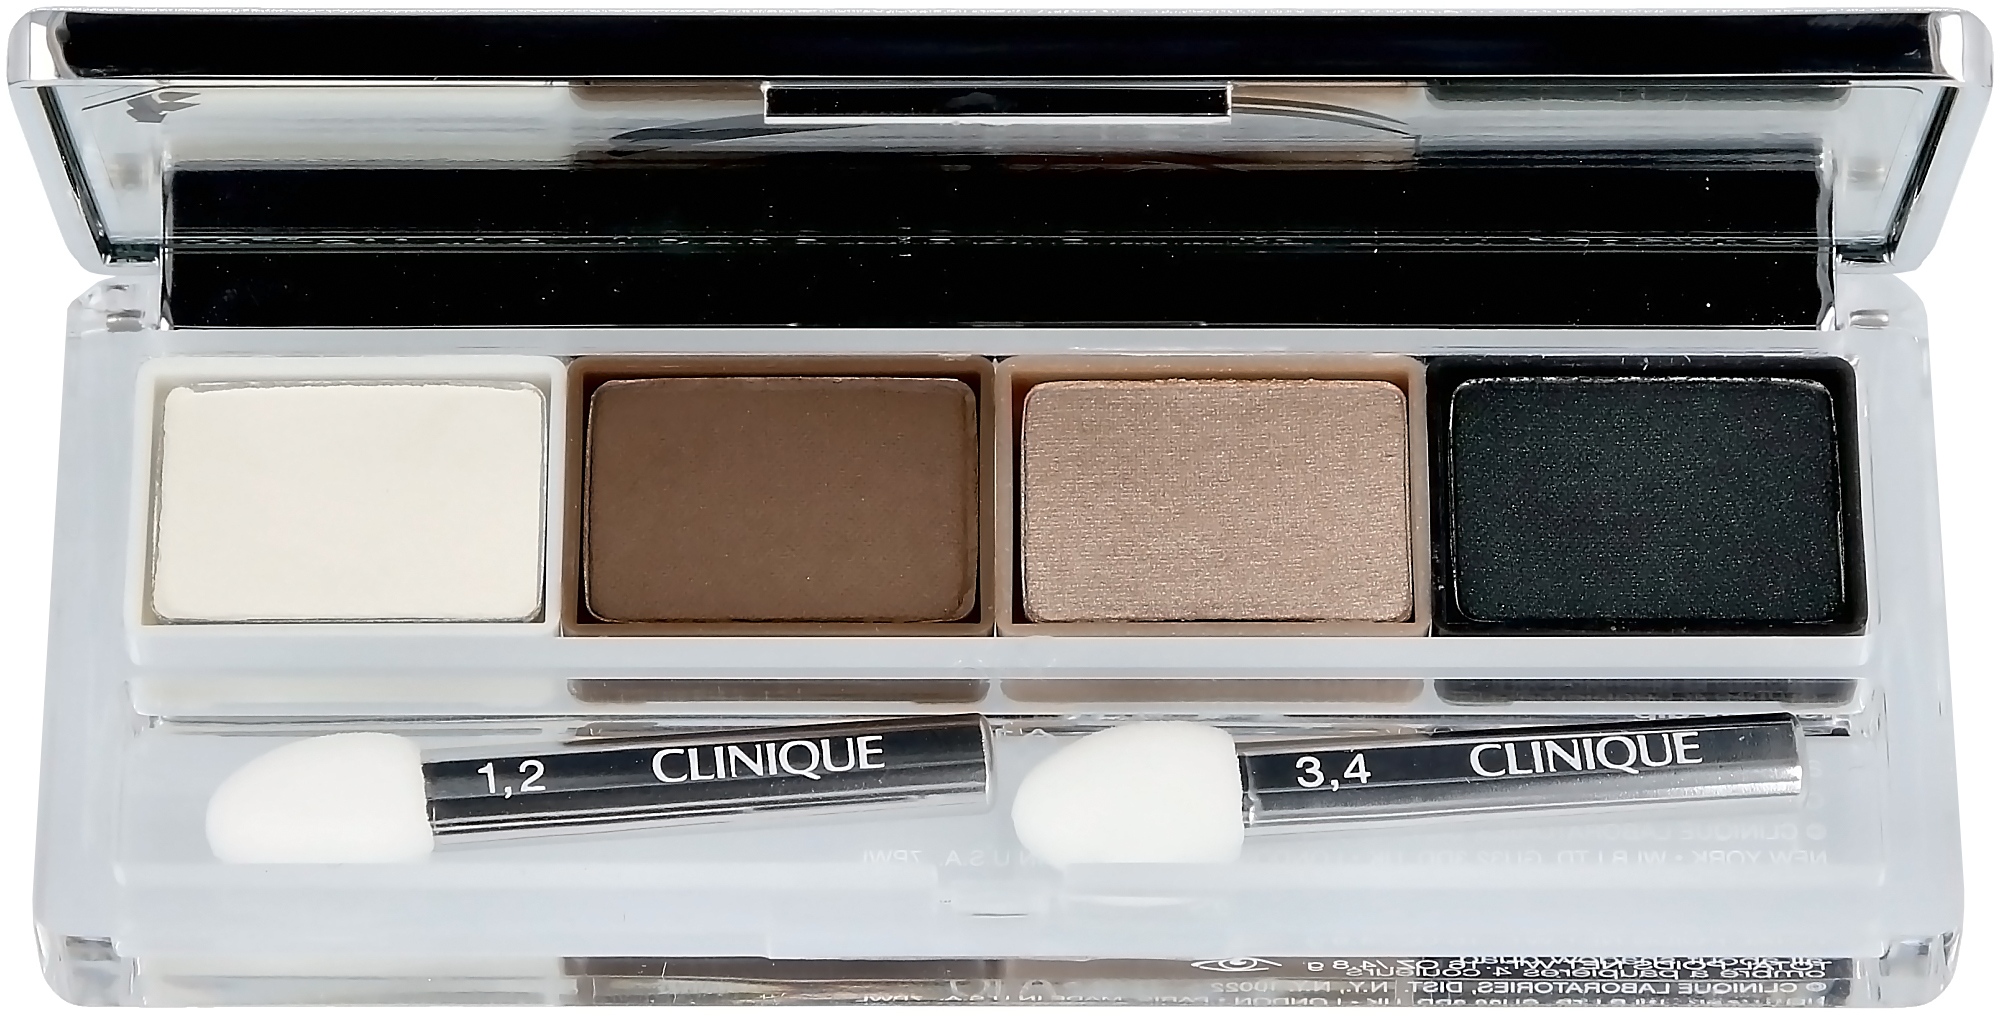 Grondwet Contour Aanbeveling Clinique All About Shadow Quads Skinny Dip | lyko.com